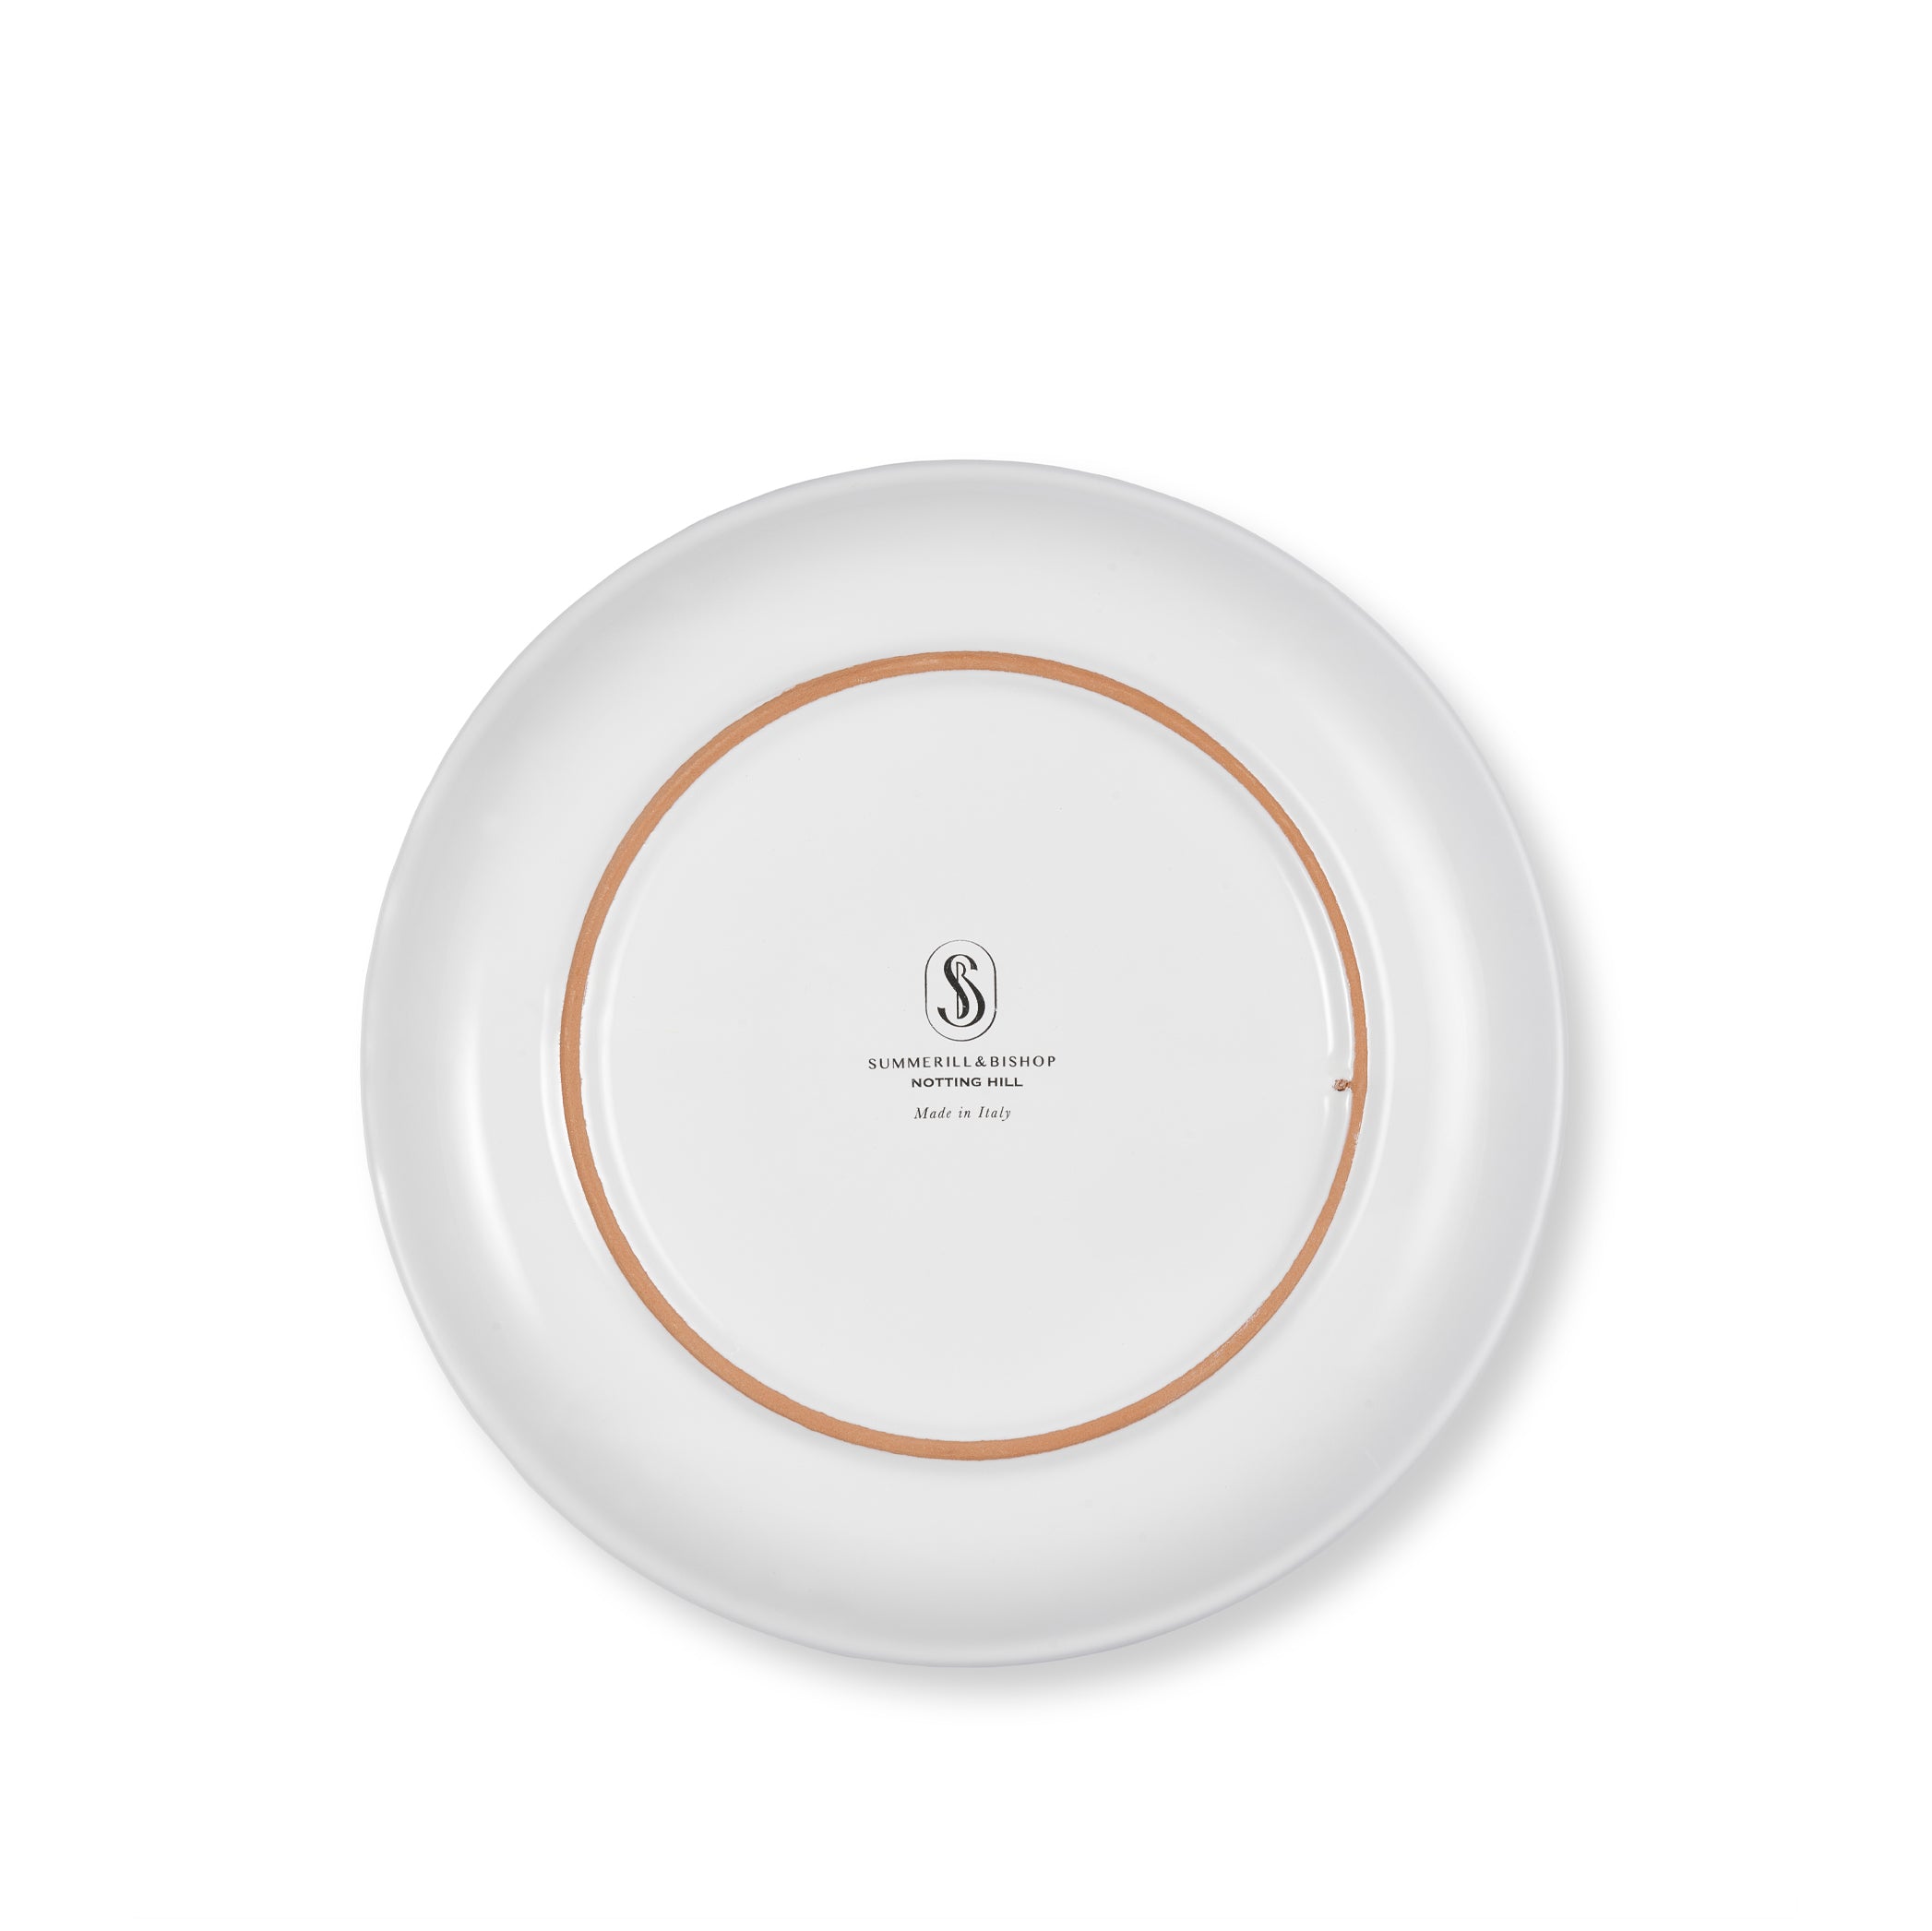 S&B Decorated Dinner Plate in White With Season Green Pattern, 26cm